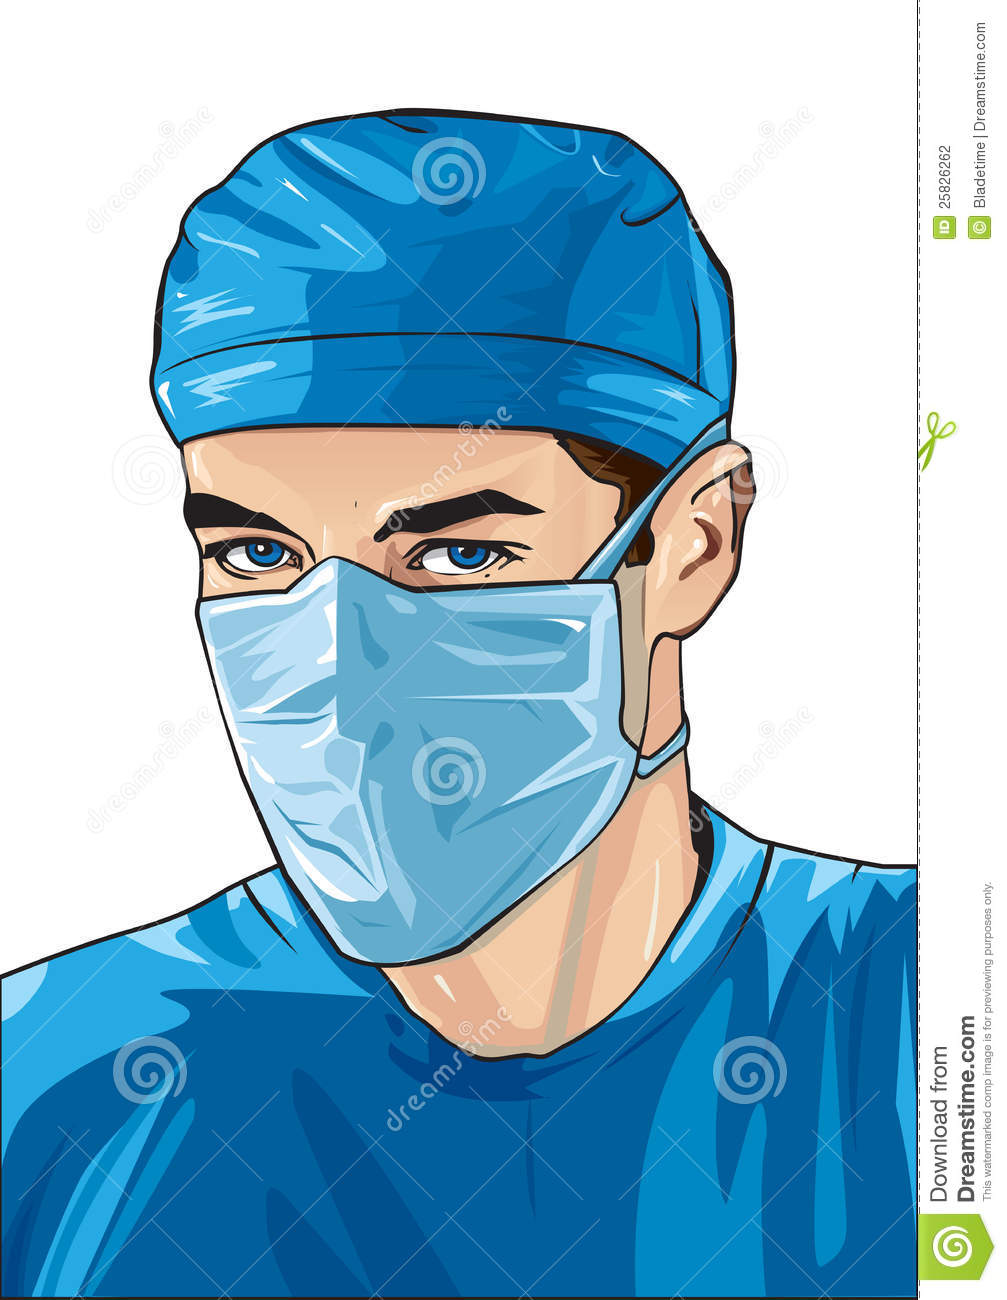 Illustration  Close Up Portrait Of A Male Nurse With Surgical Mask